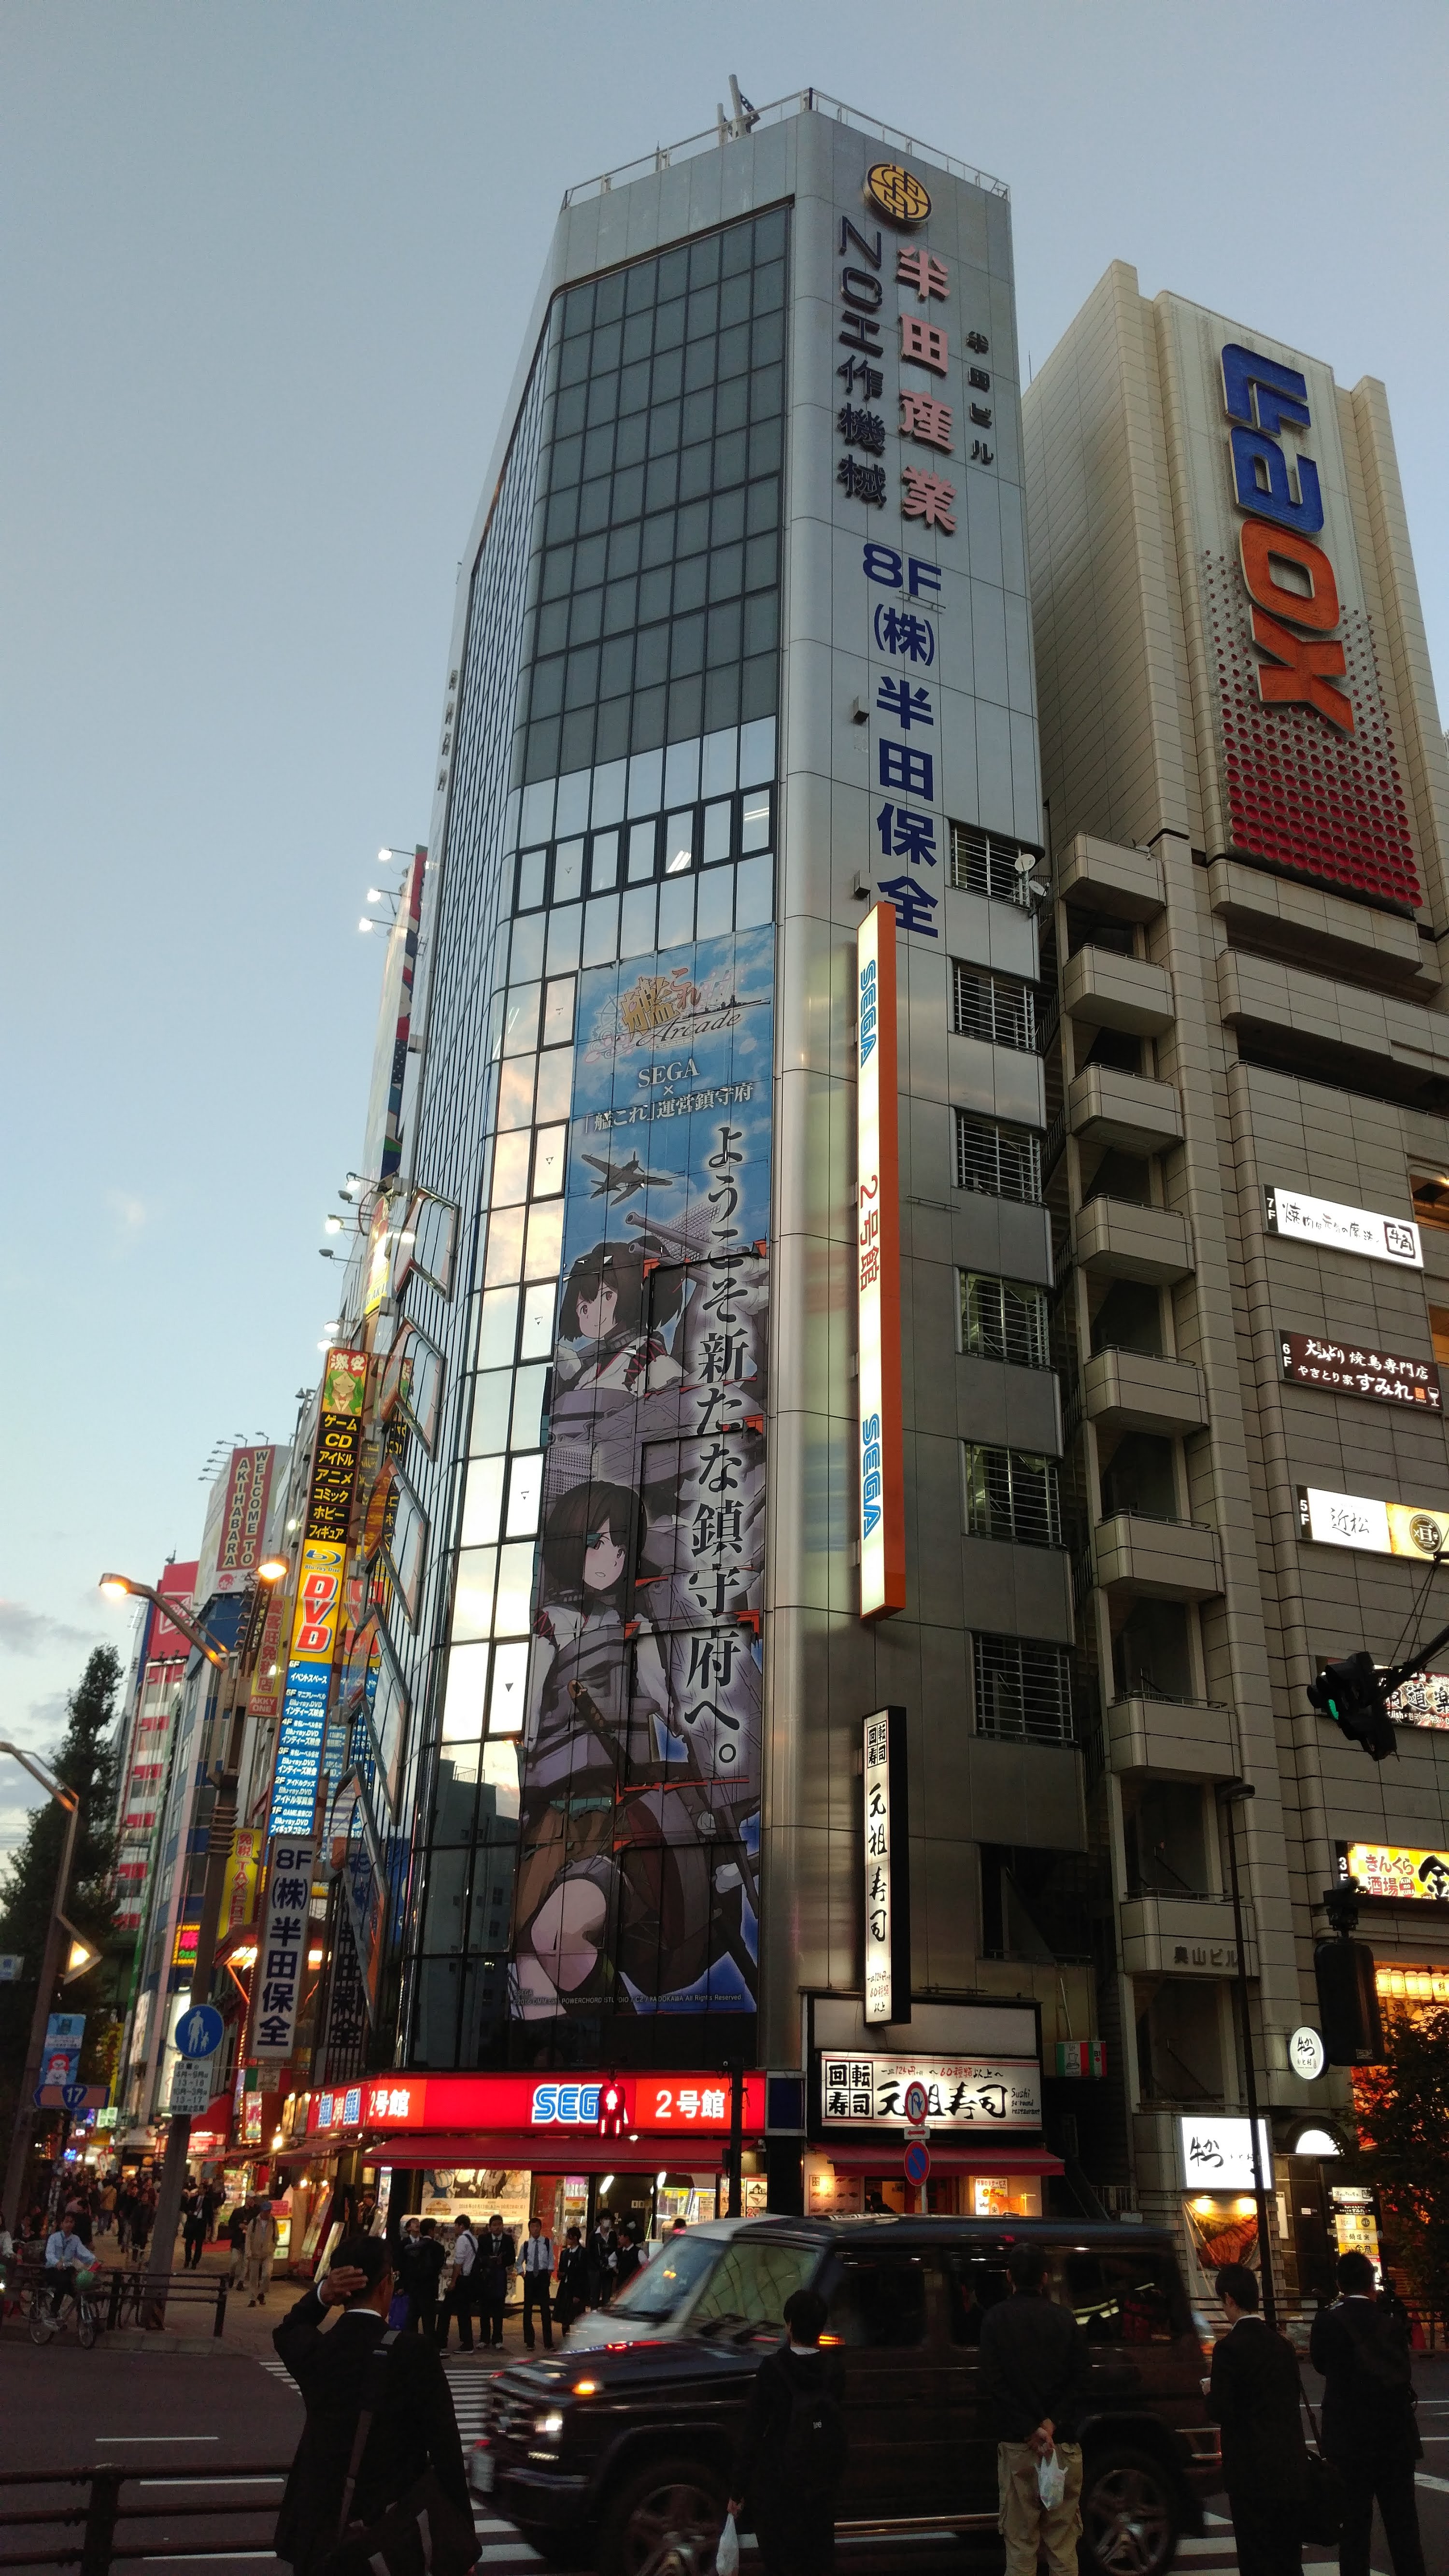 a tallbuilding with a large illustrated advertisement